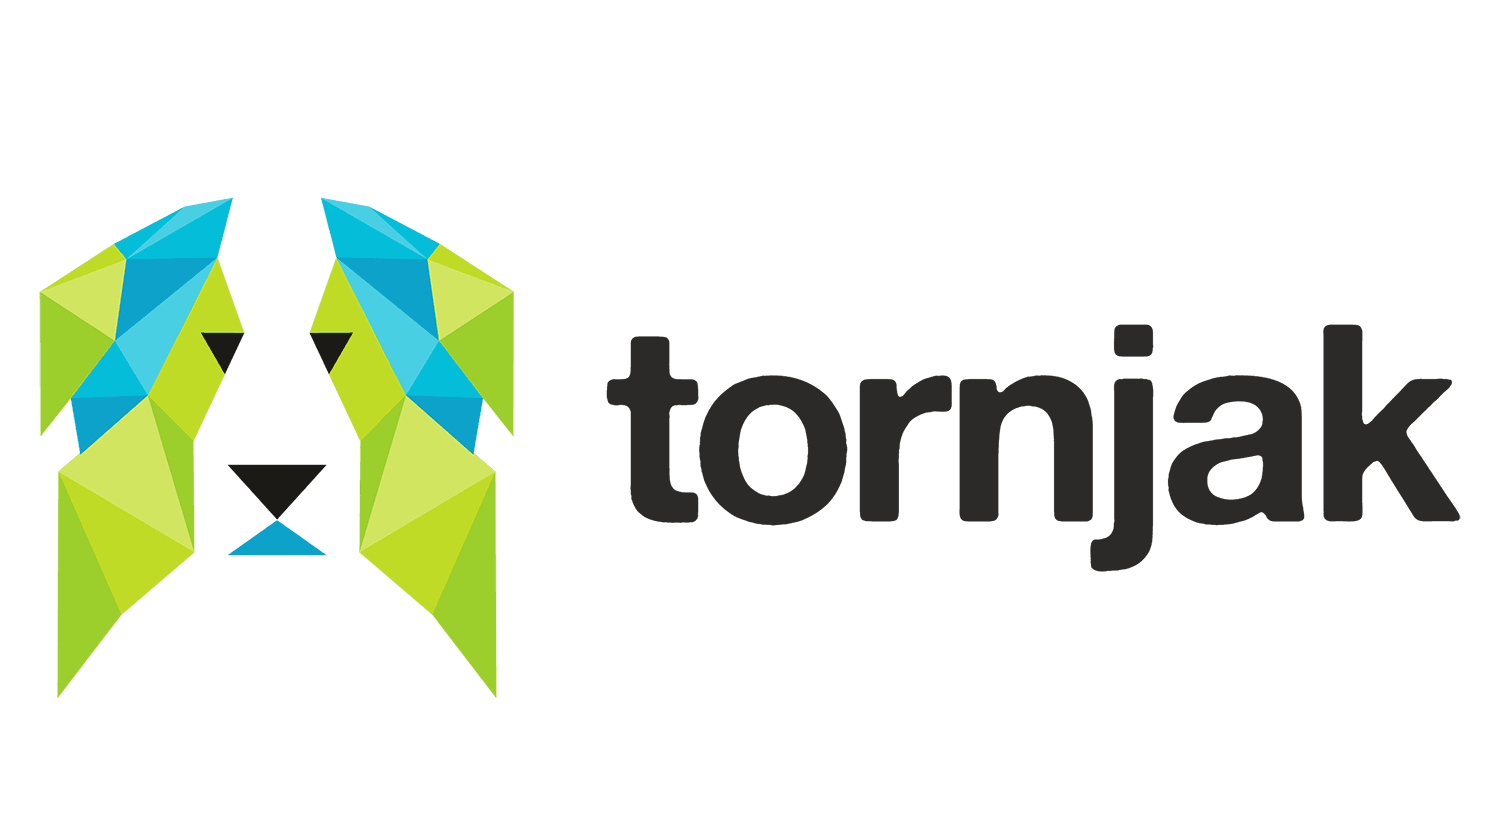 IBM open sourcing project “Tornjak” logo.